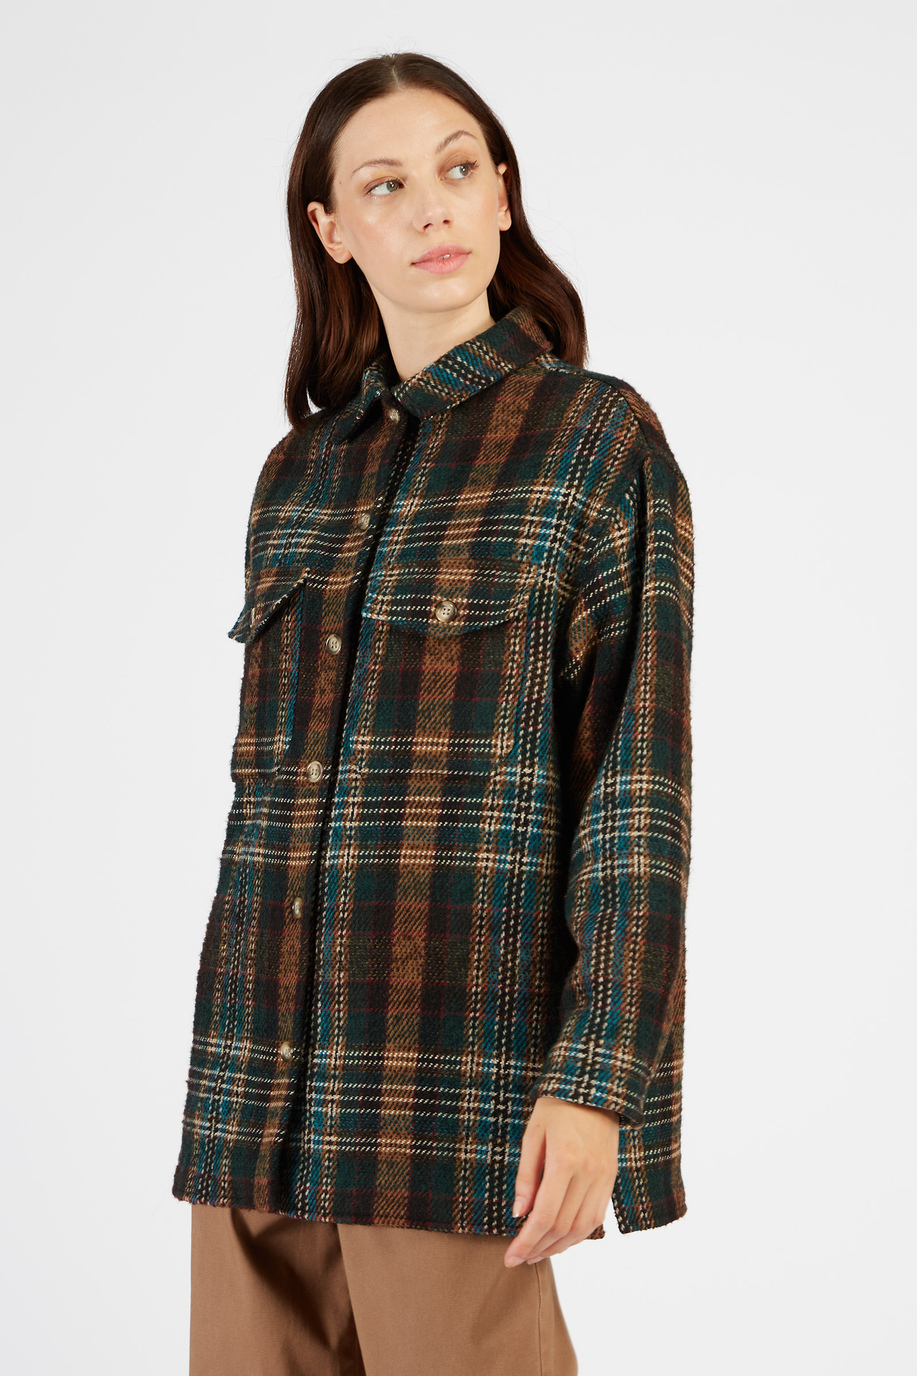 Women’s wool jacket long sleeves checked pattern regular fit - Autumn style | La Martina - Official Online Shop